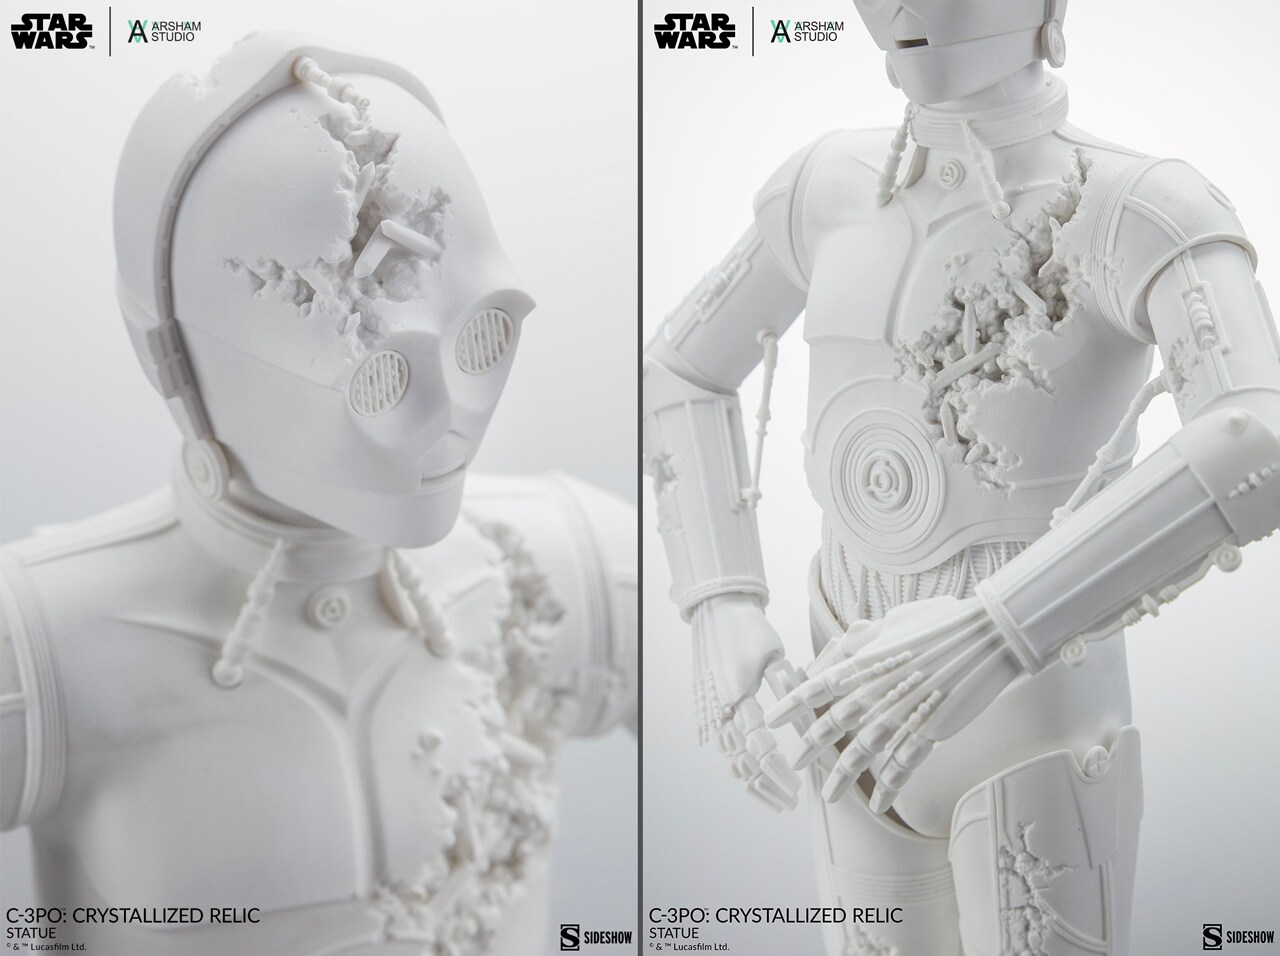 A close up of Arsham’s C-3PO crystalized sculpture